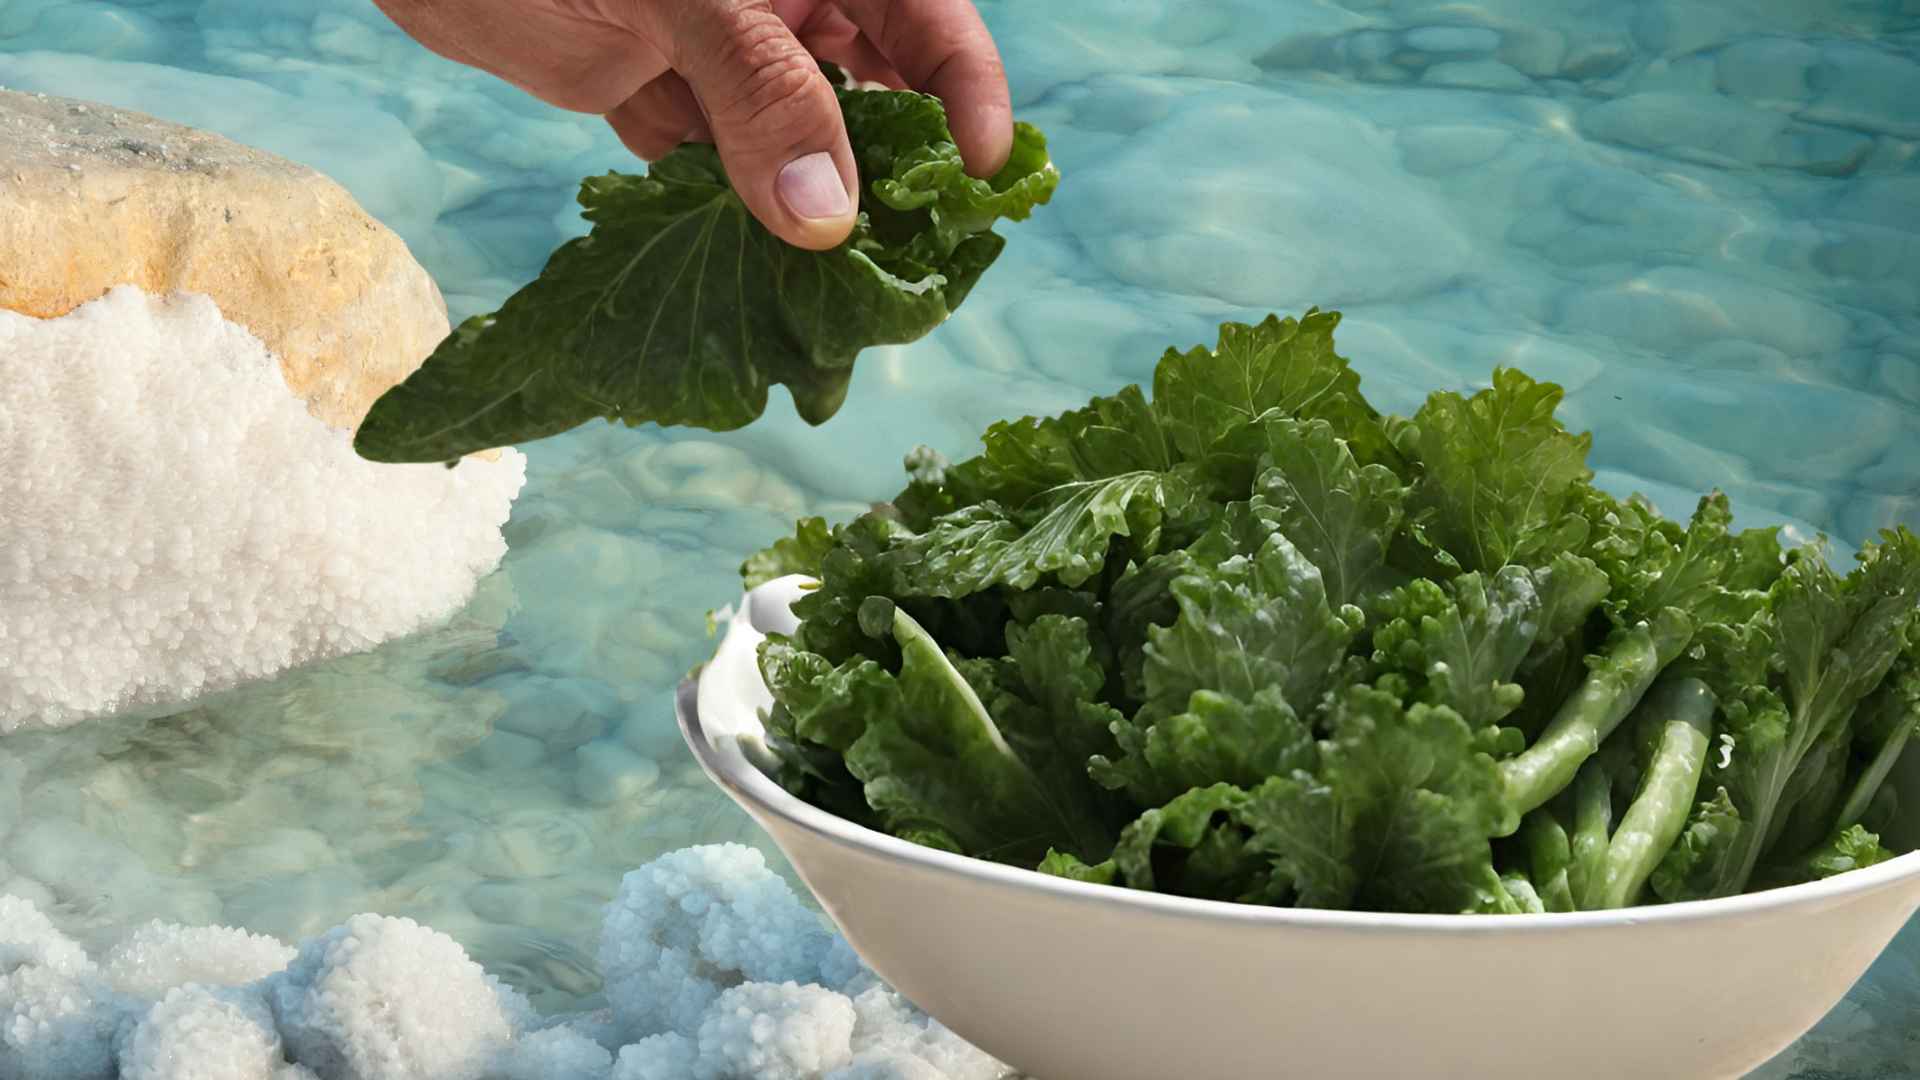 Preparing to dip a leafy green vegetable (karpas) into the Dead Sea